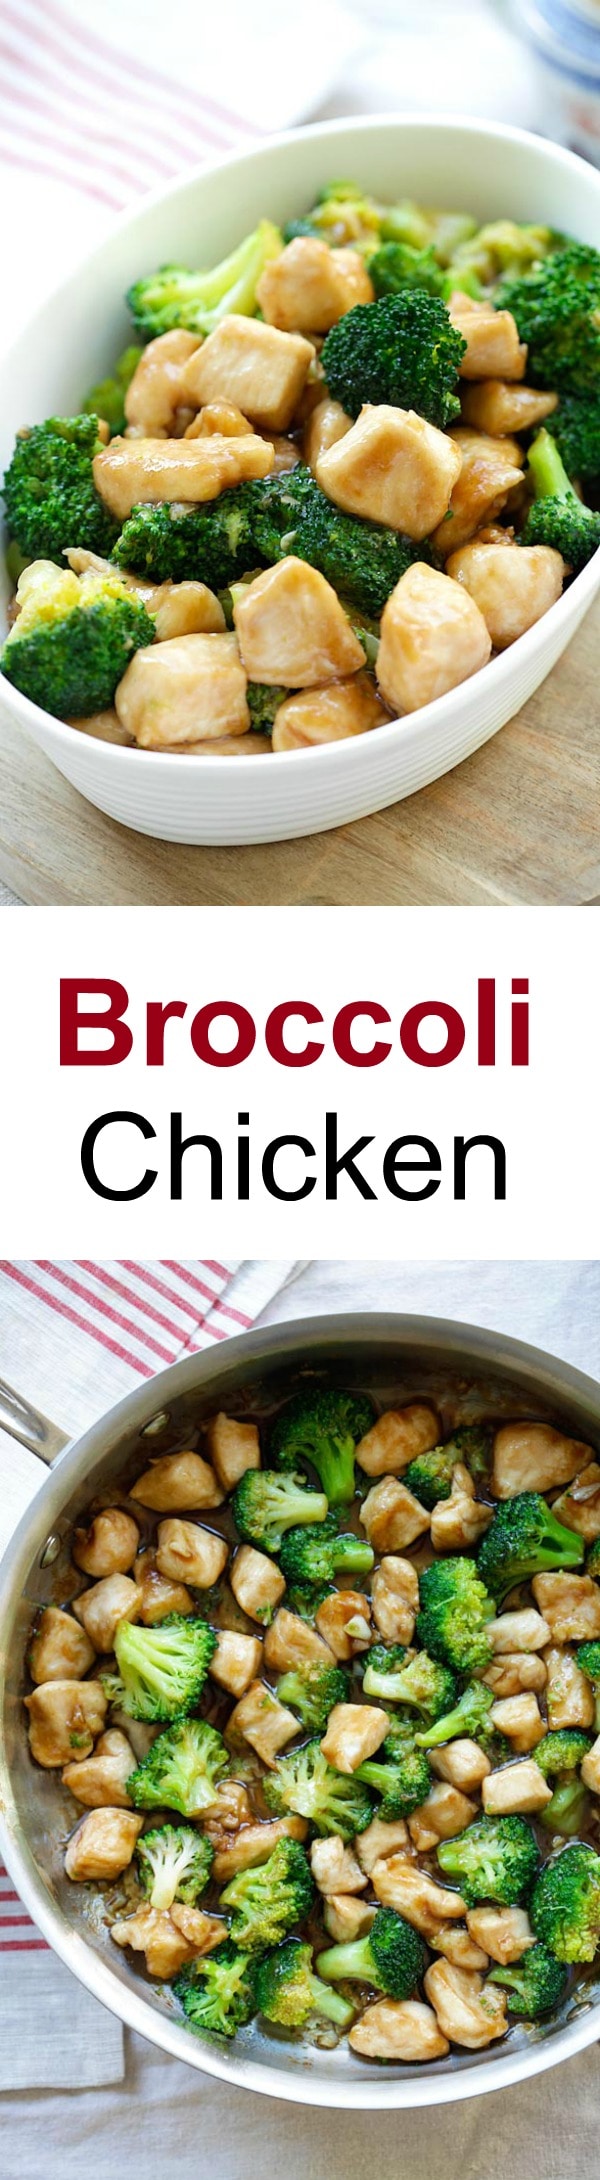 Chicken and Broccoli – Learn how to make healthy homemade chicken broccoli in brown sauce. Best and popular Chinese takeout recipe | rasamalaysia.com